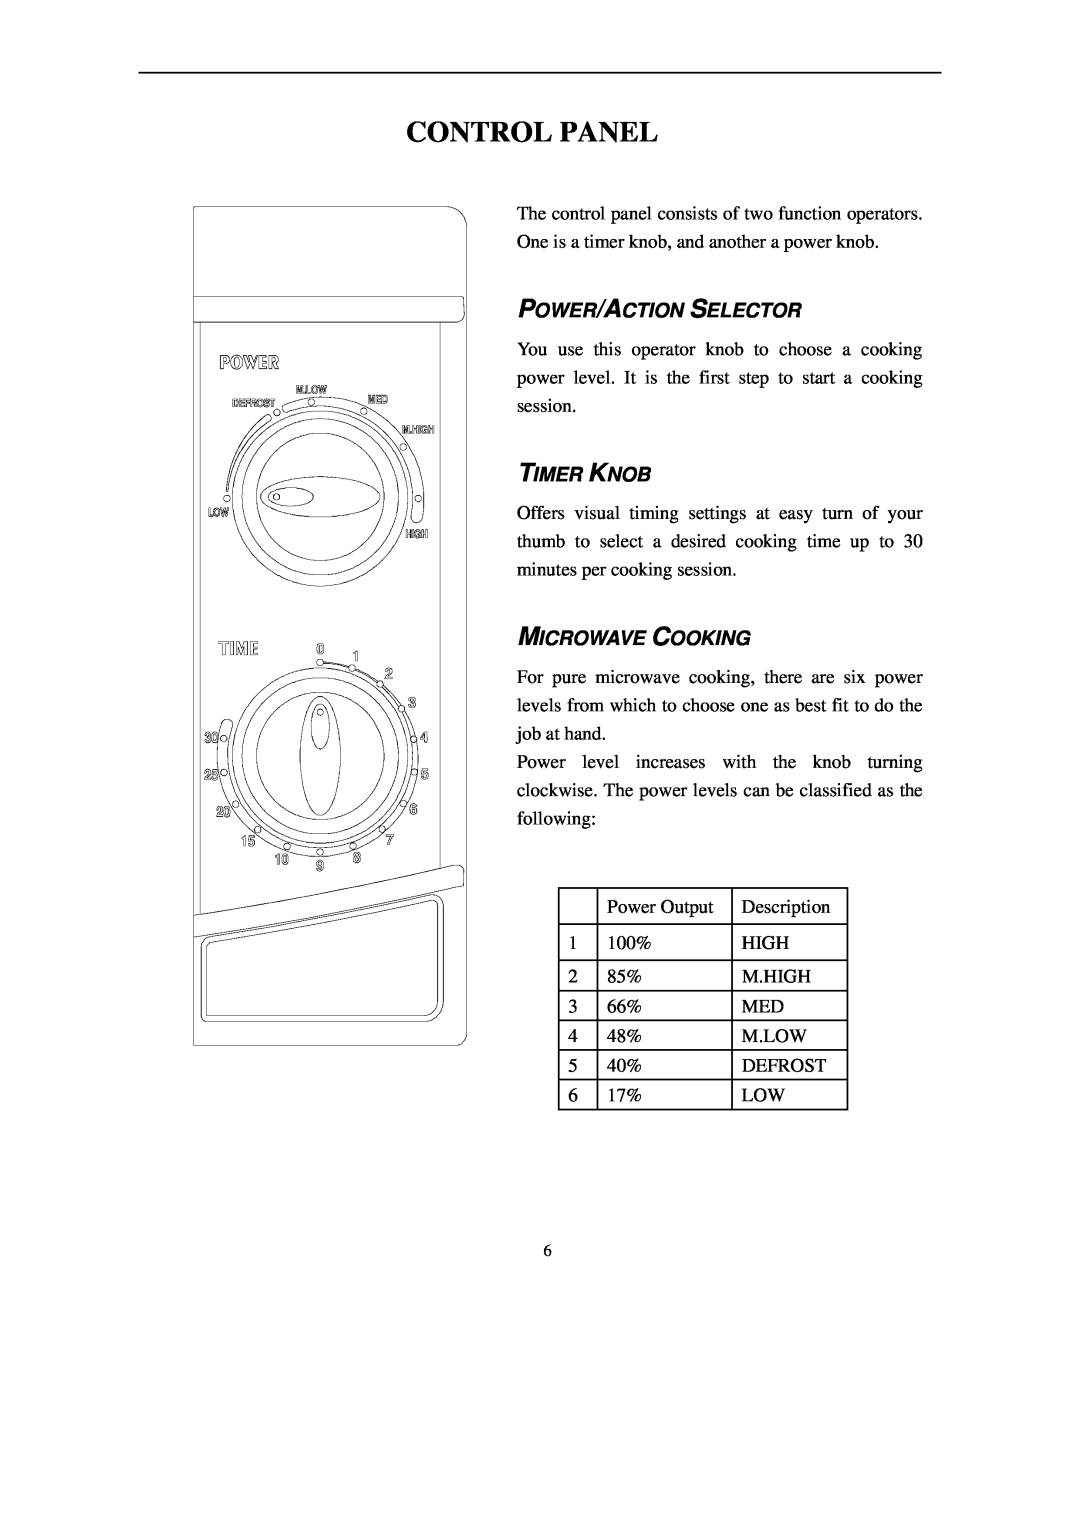 Haier HGN-2070M owner manual Control Panel, Power/Action Selector, Timer Knob, Microwave Cooking 